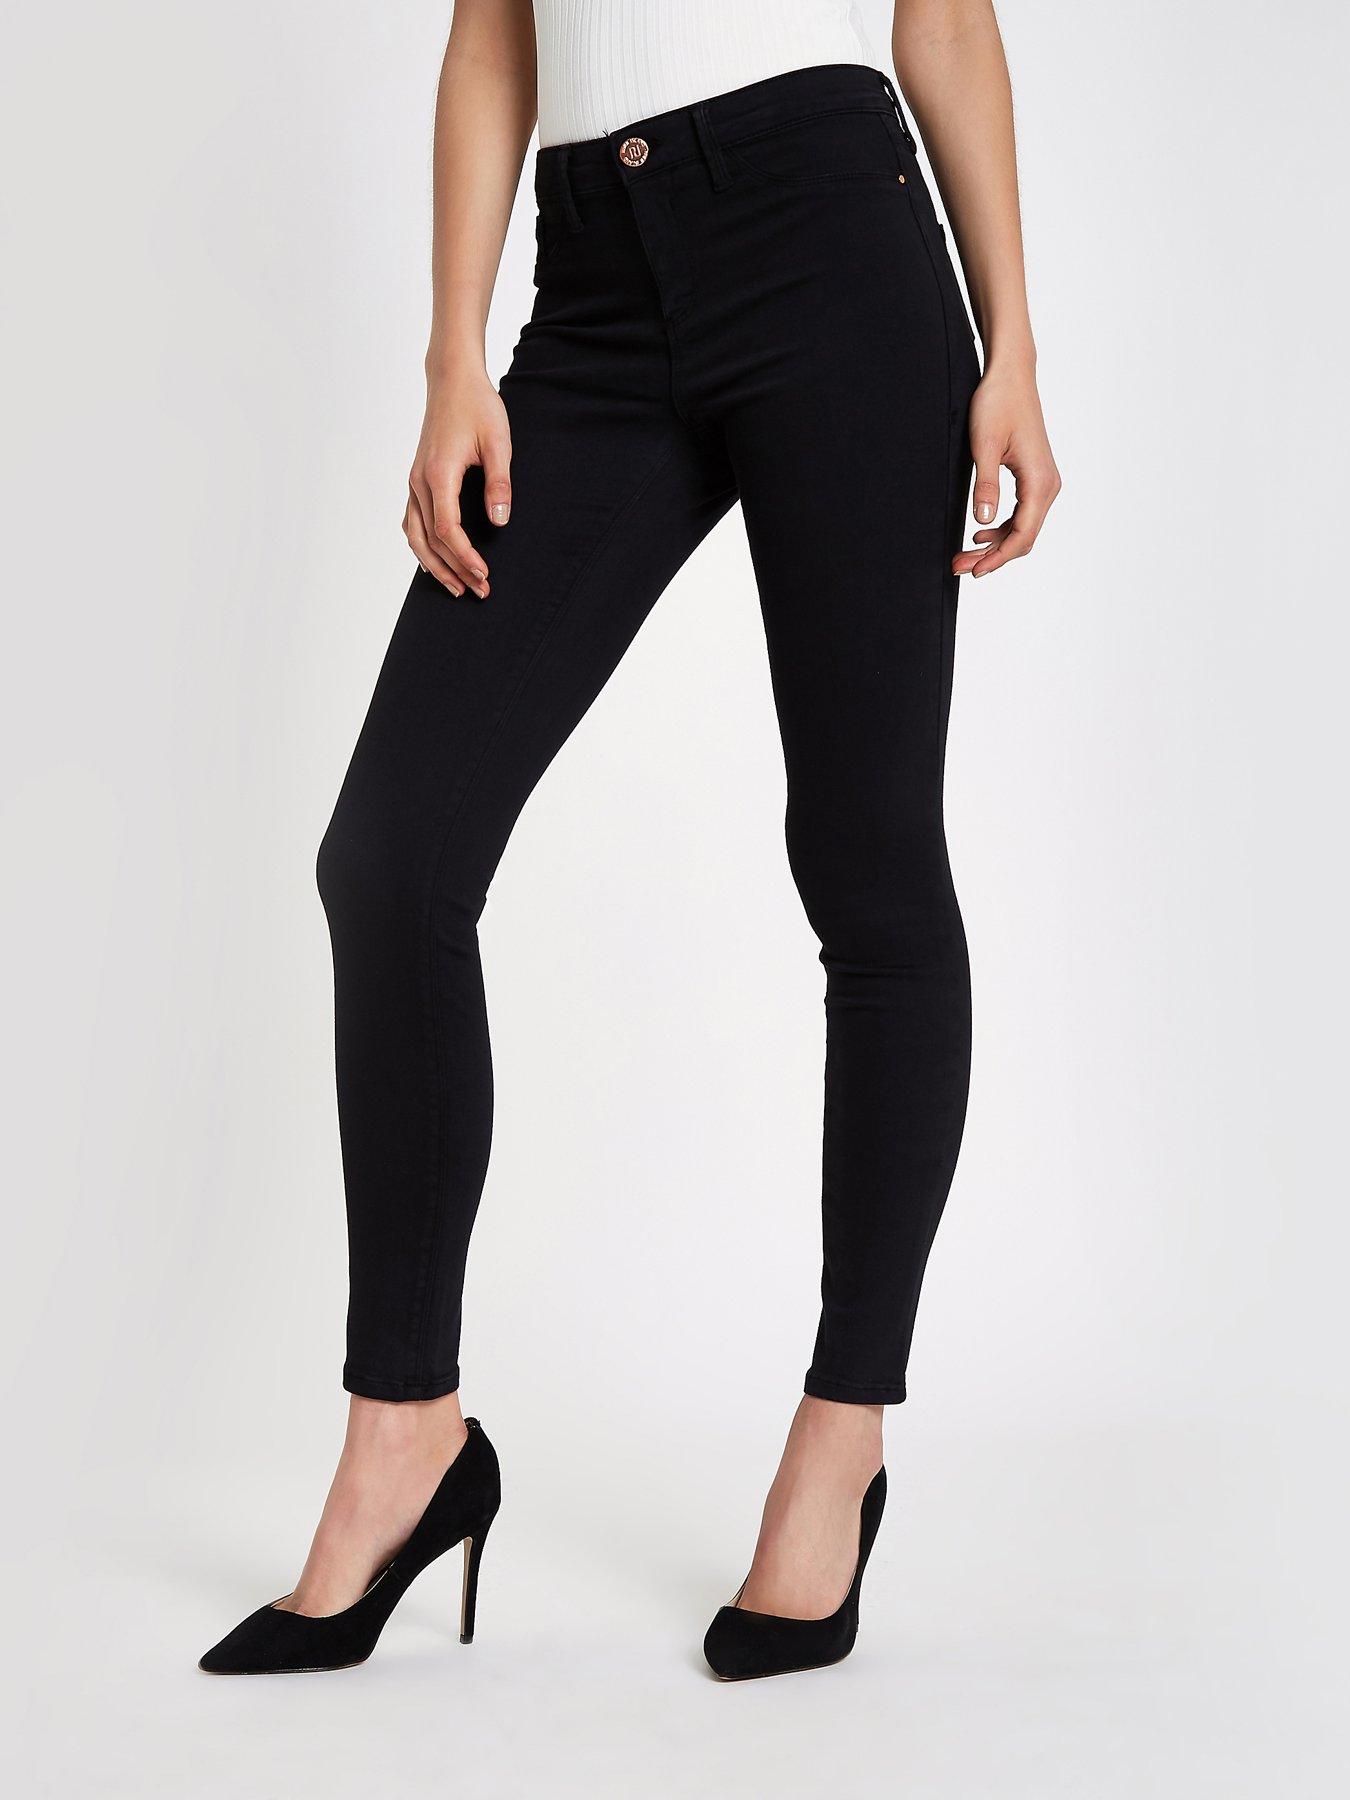 river island molly black jeans